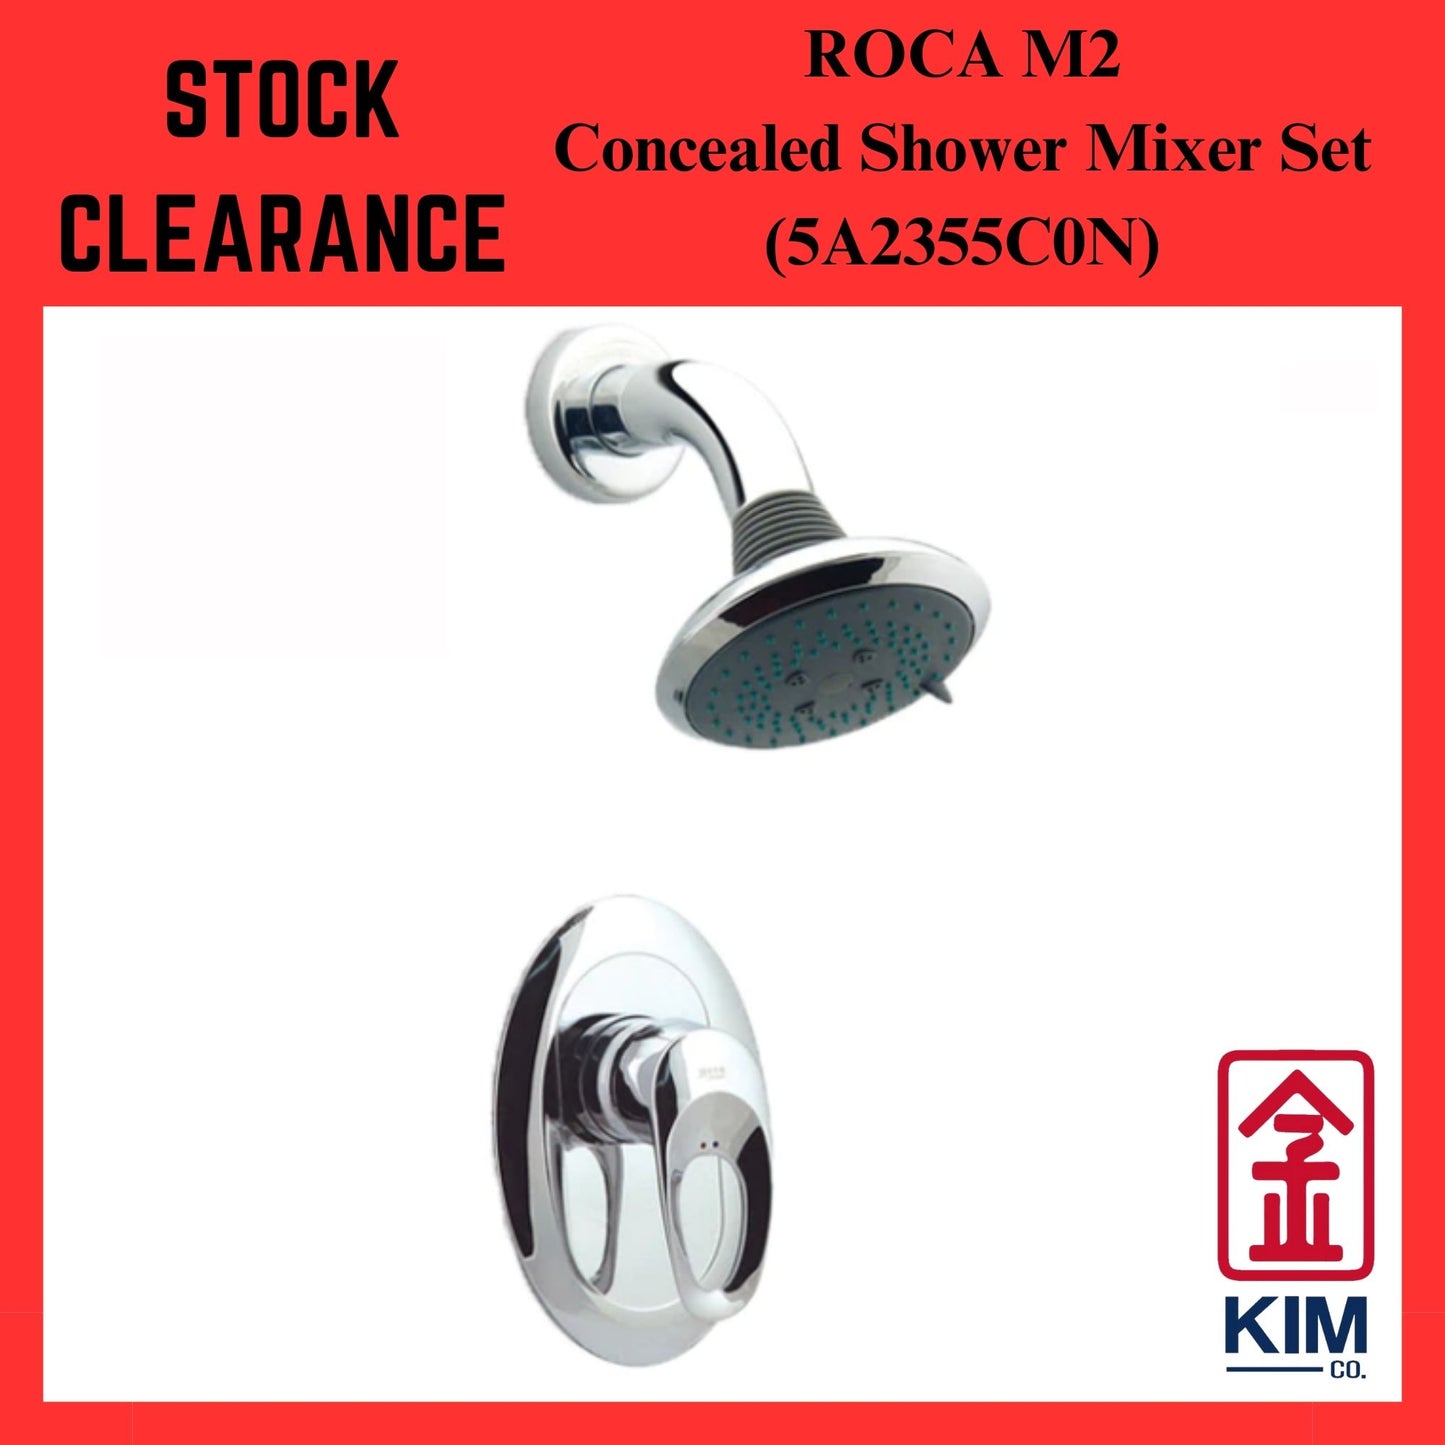 ( Stock Clearance ) Roca M2 Concealed Shower Mixer With Shower Arm & Head Set (5A2355C0N)